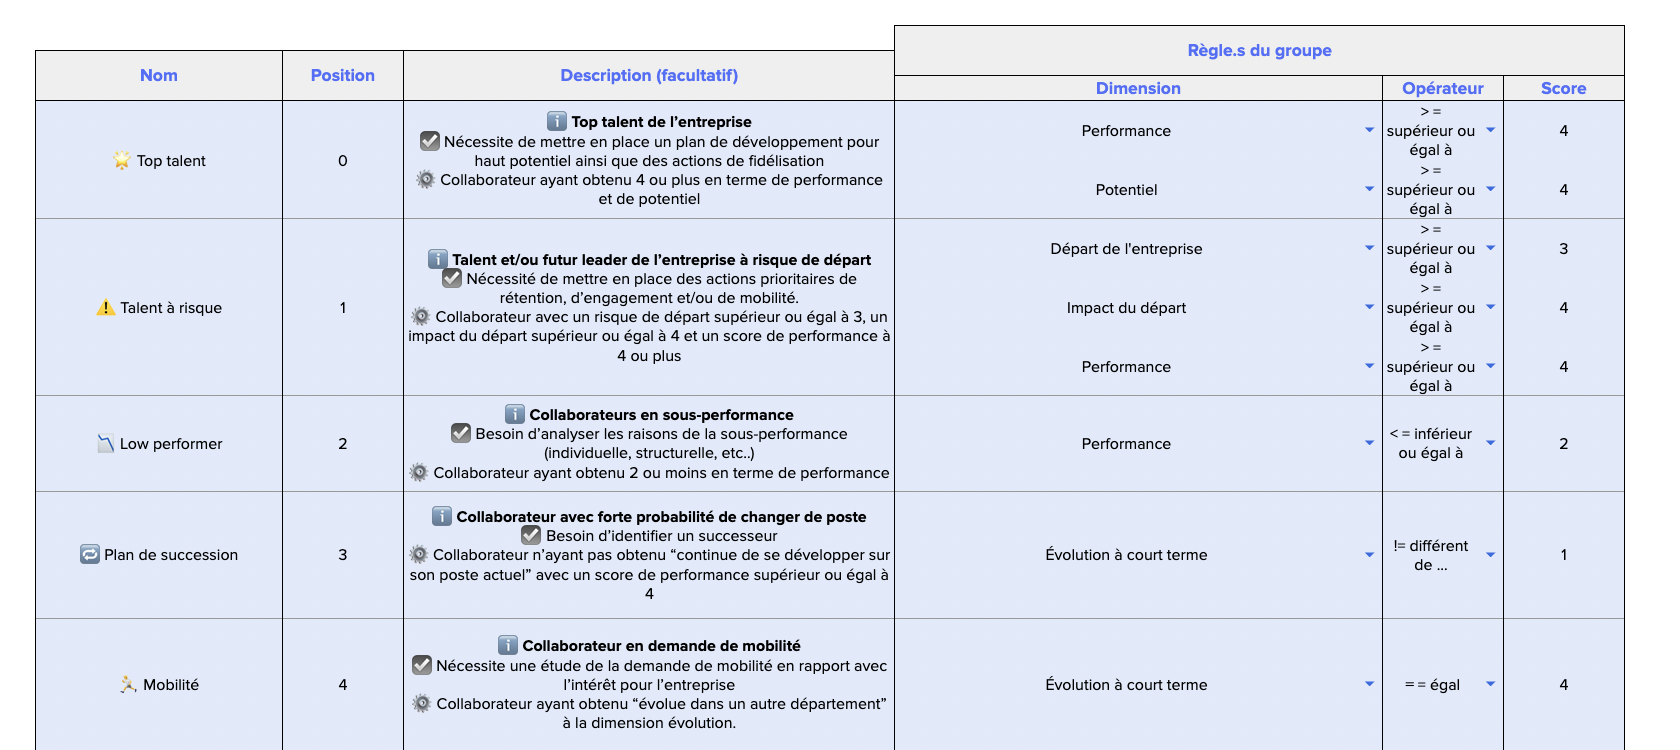 FR_Screen_PR_Groupes_Fichier.png